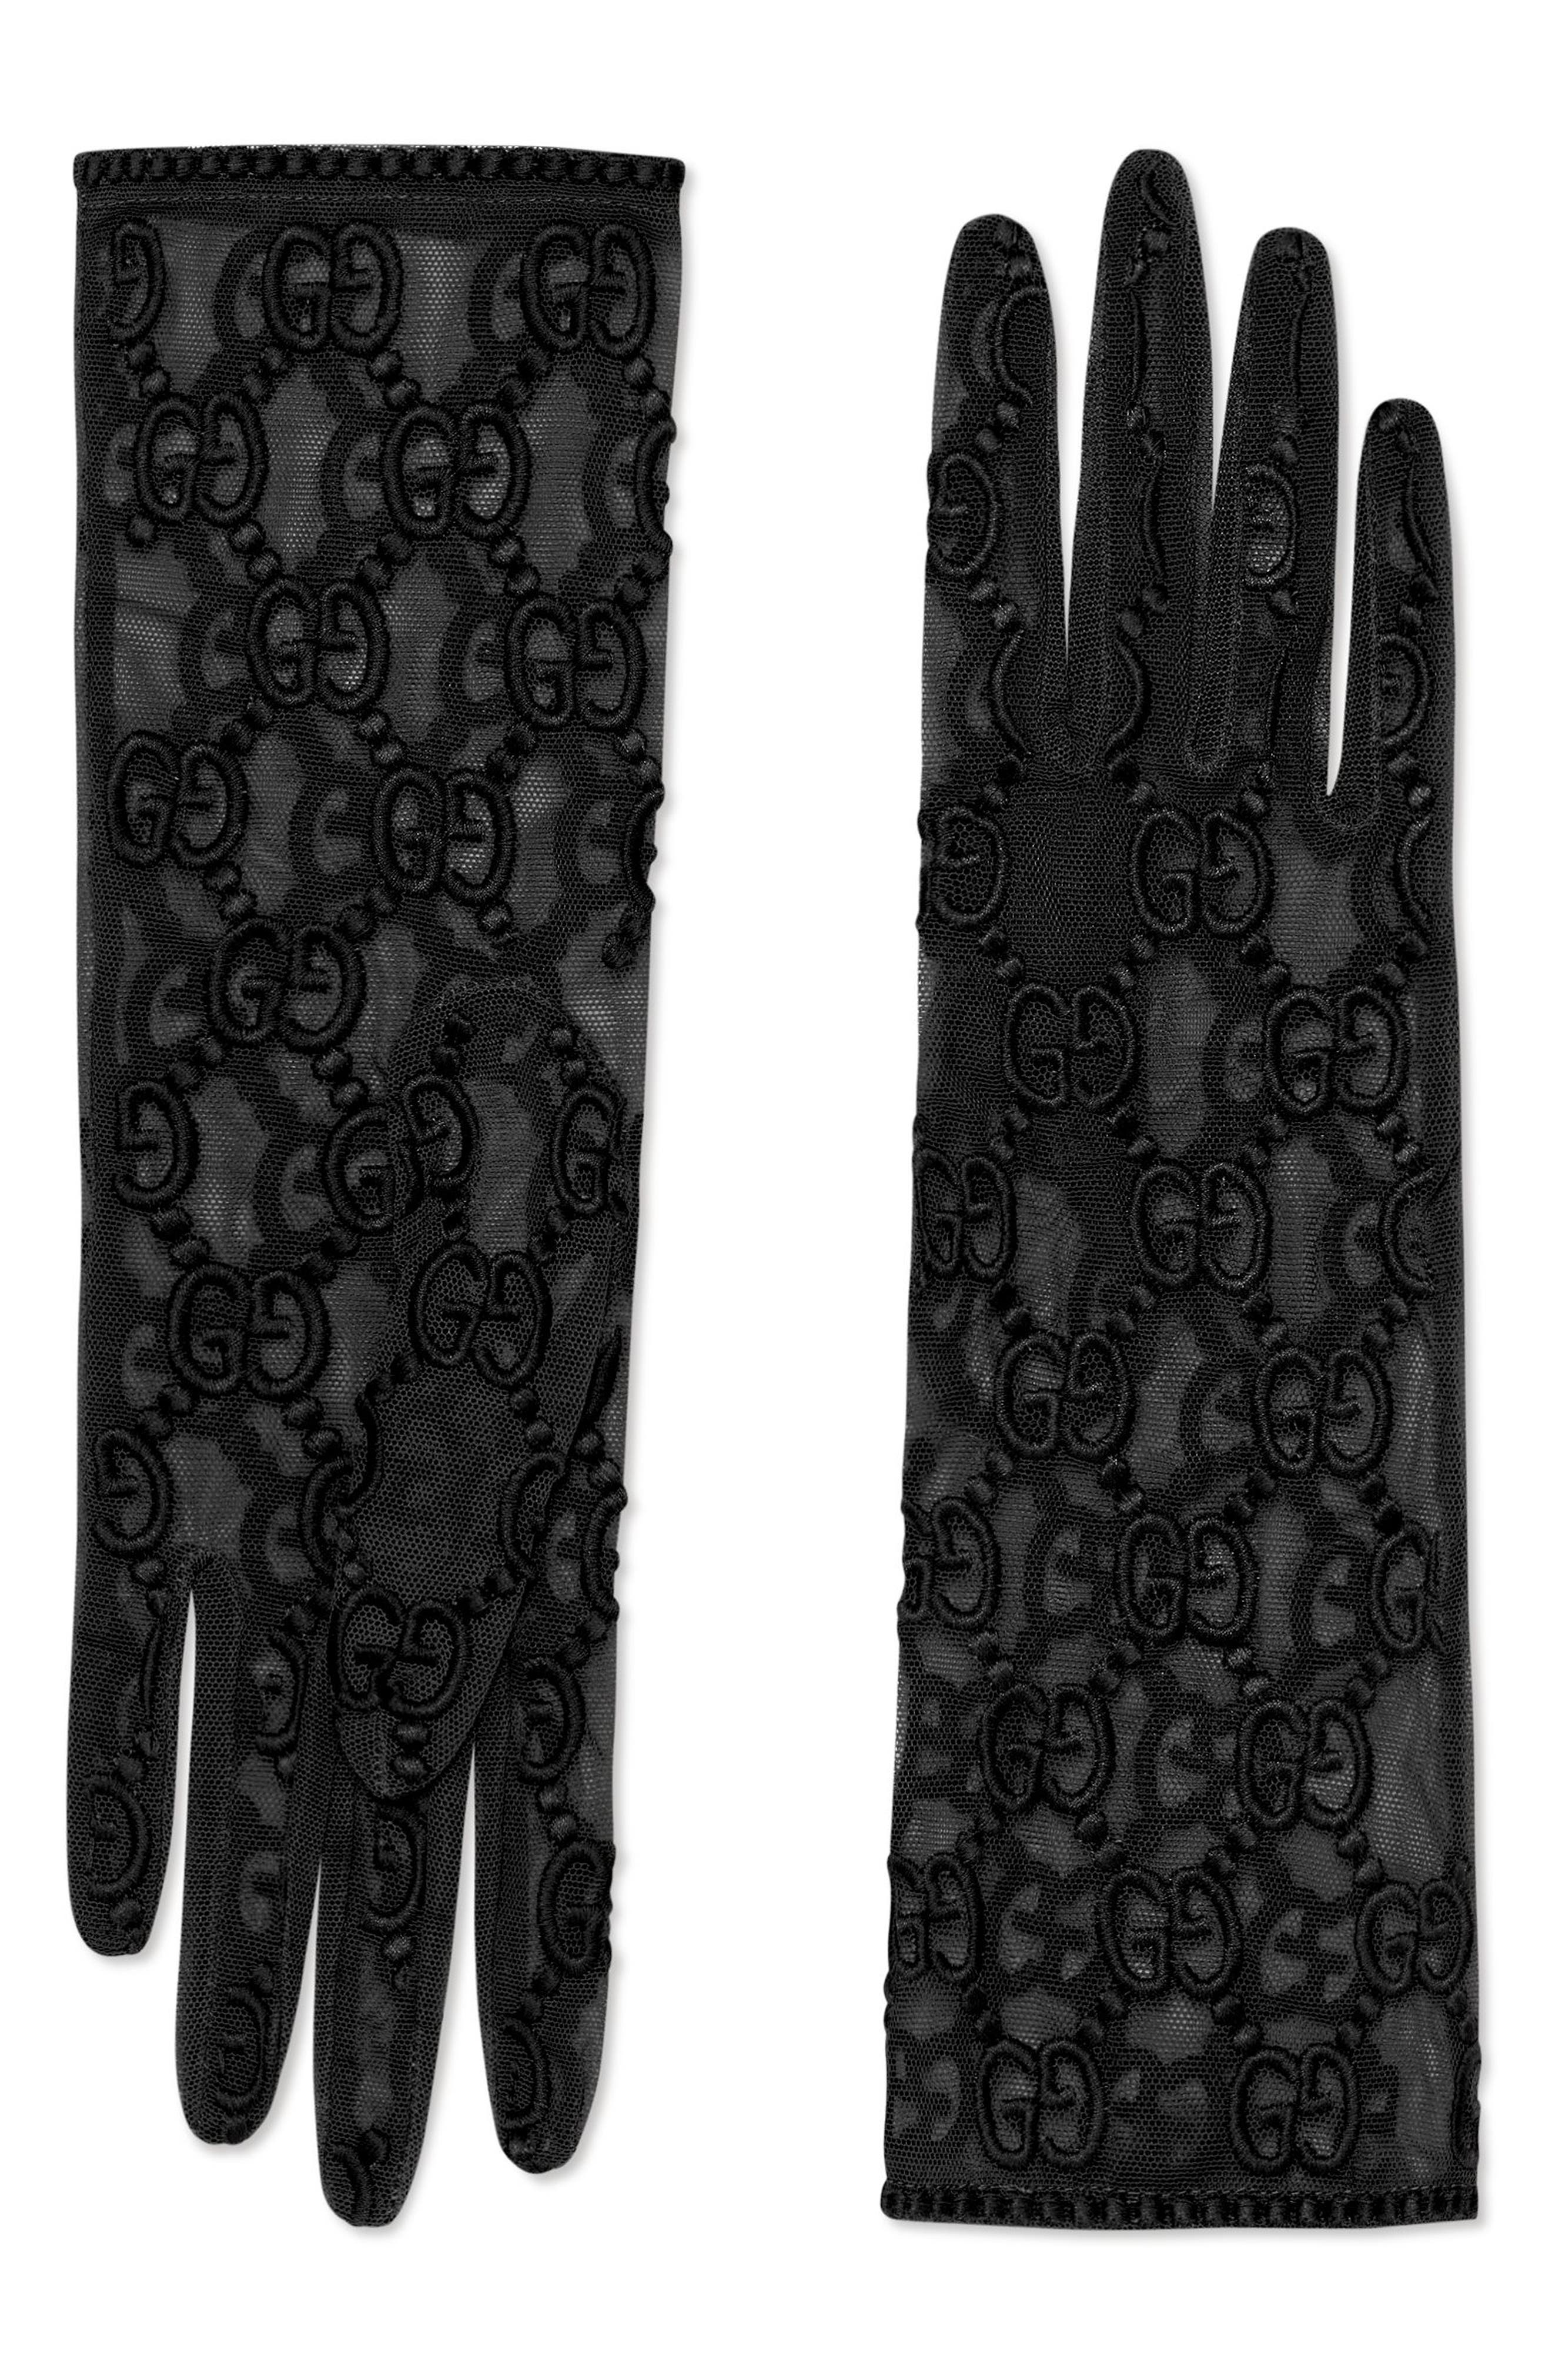 where can i find lace gloves